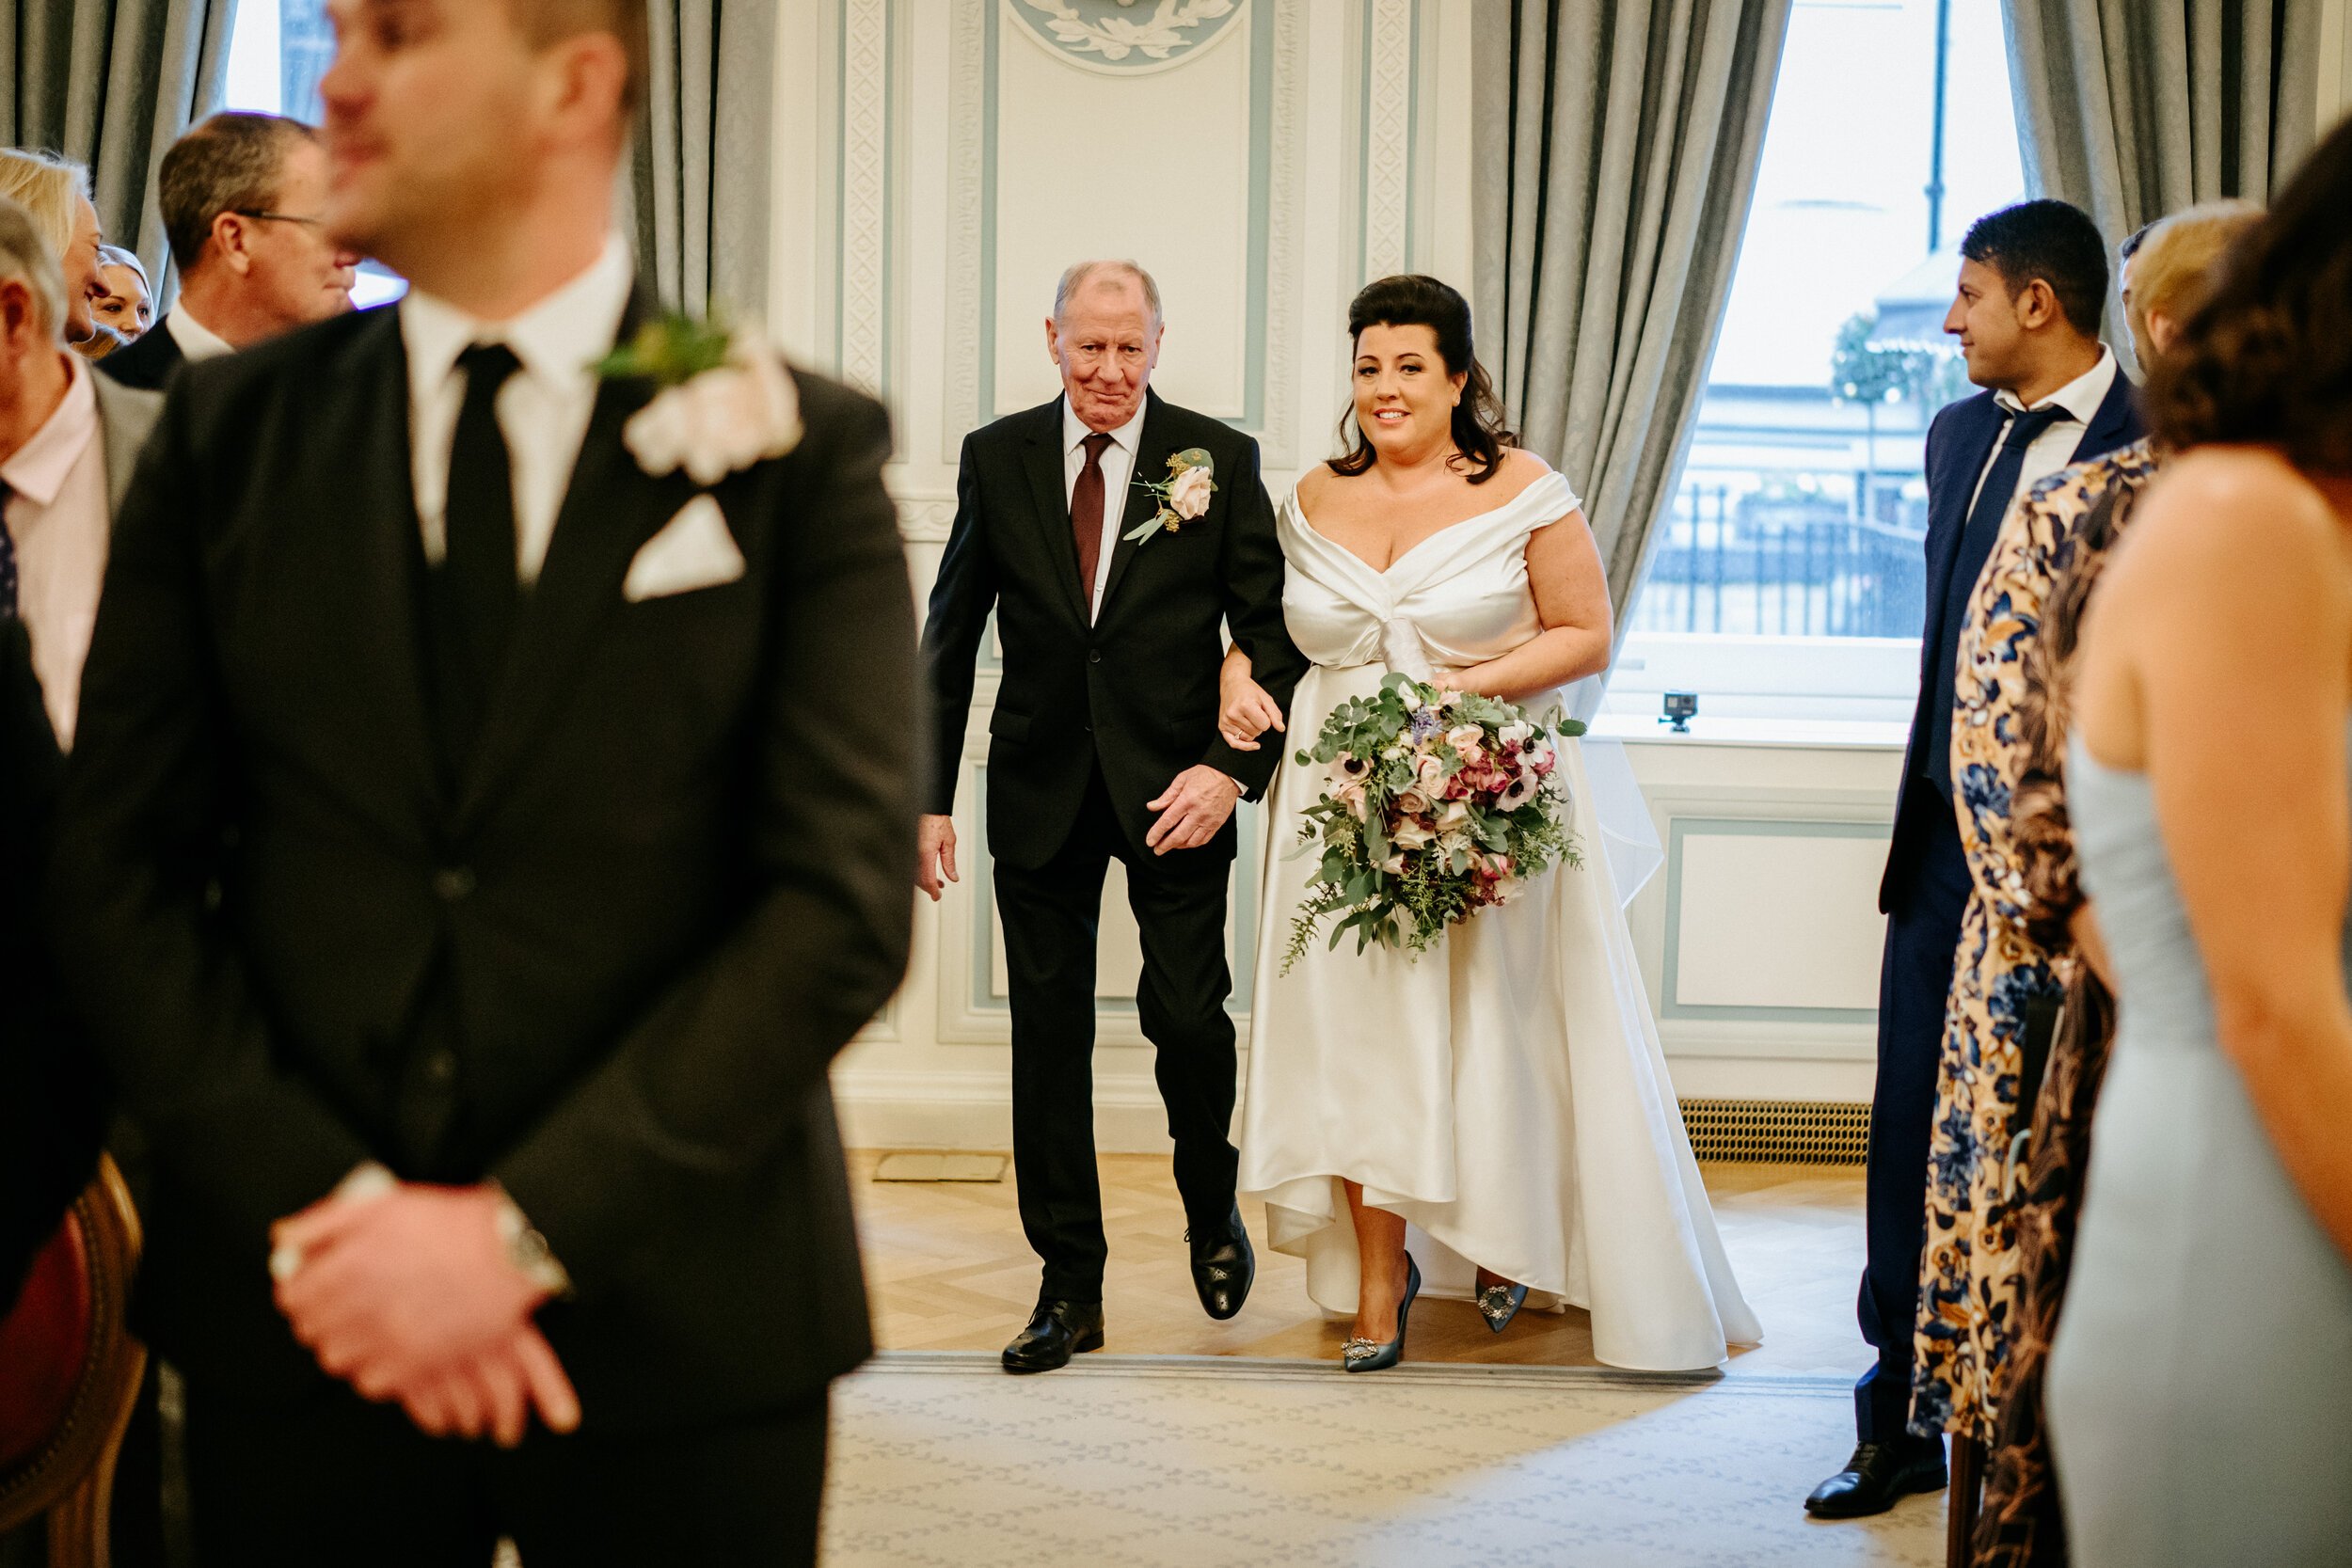 Beautiful bride Louise wore a wedding dress by Halfpenny London